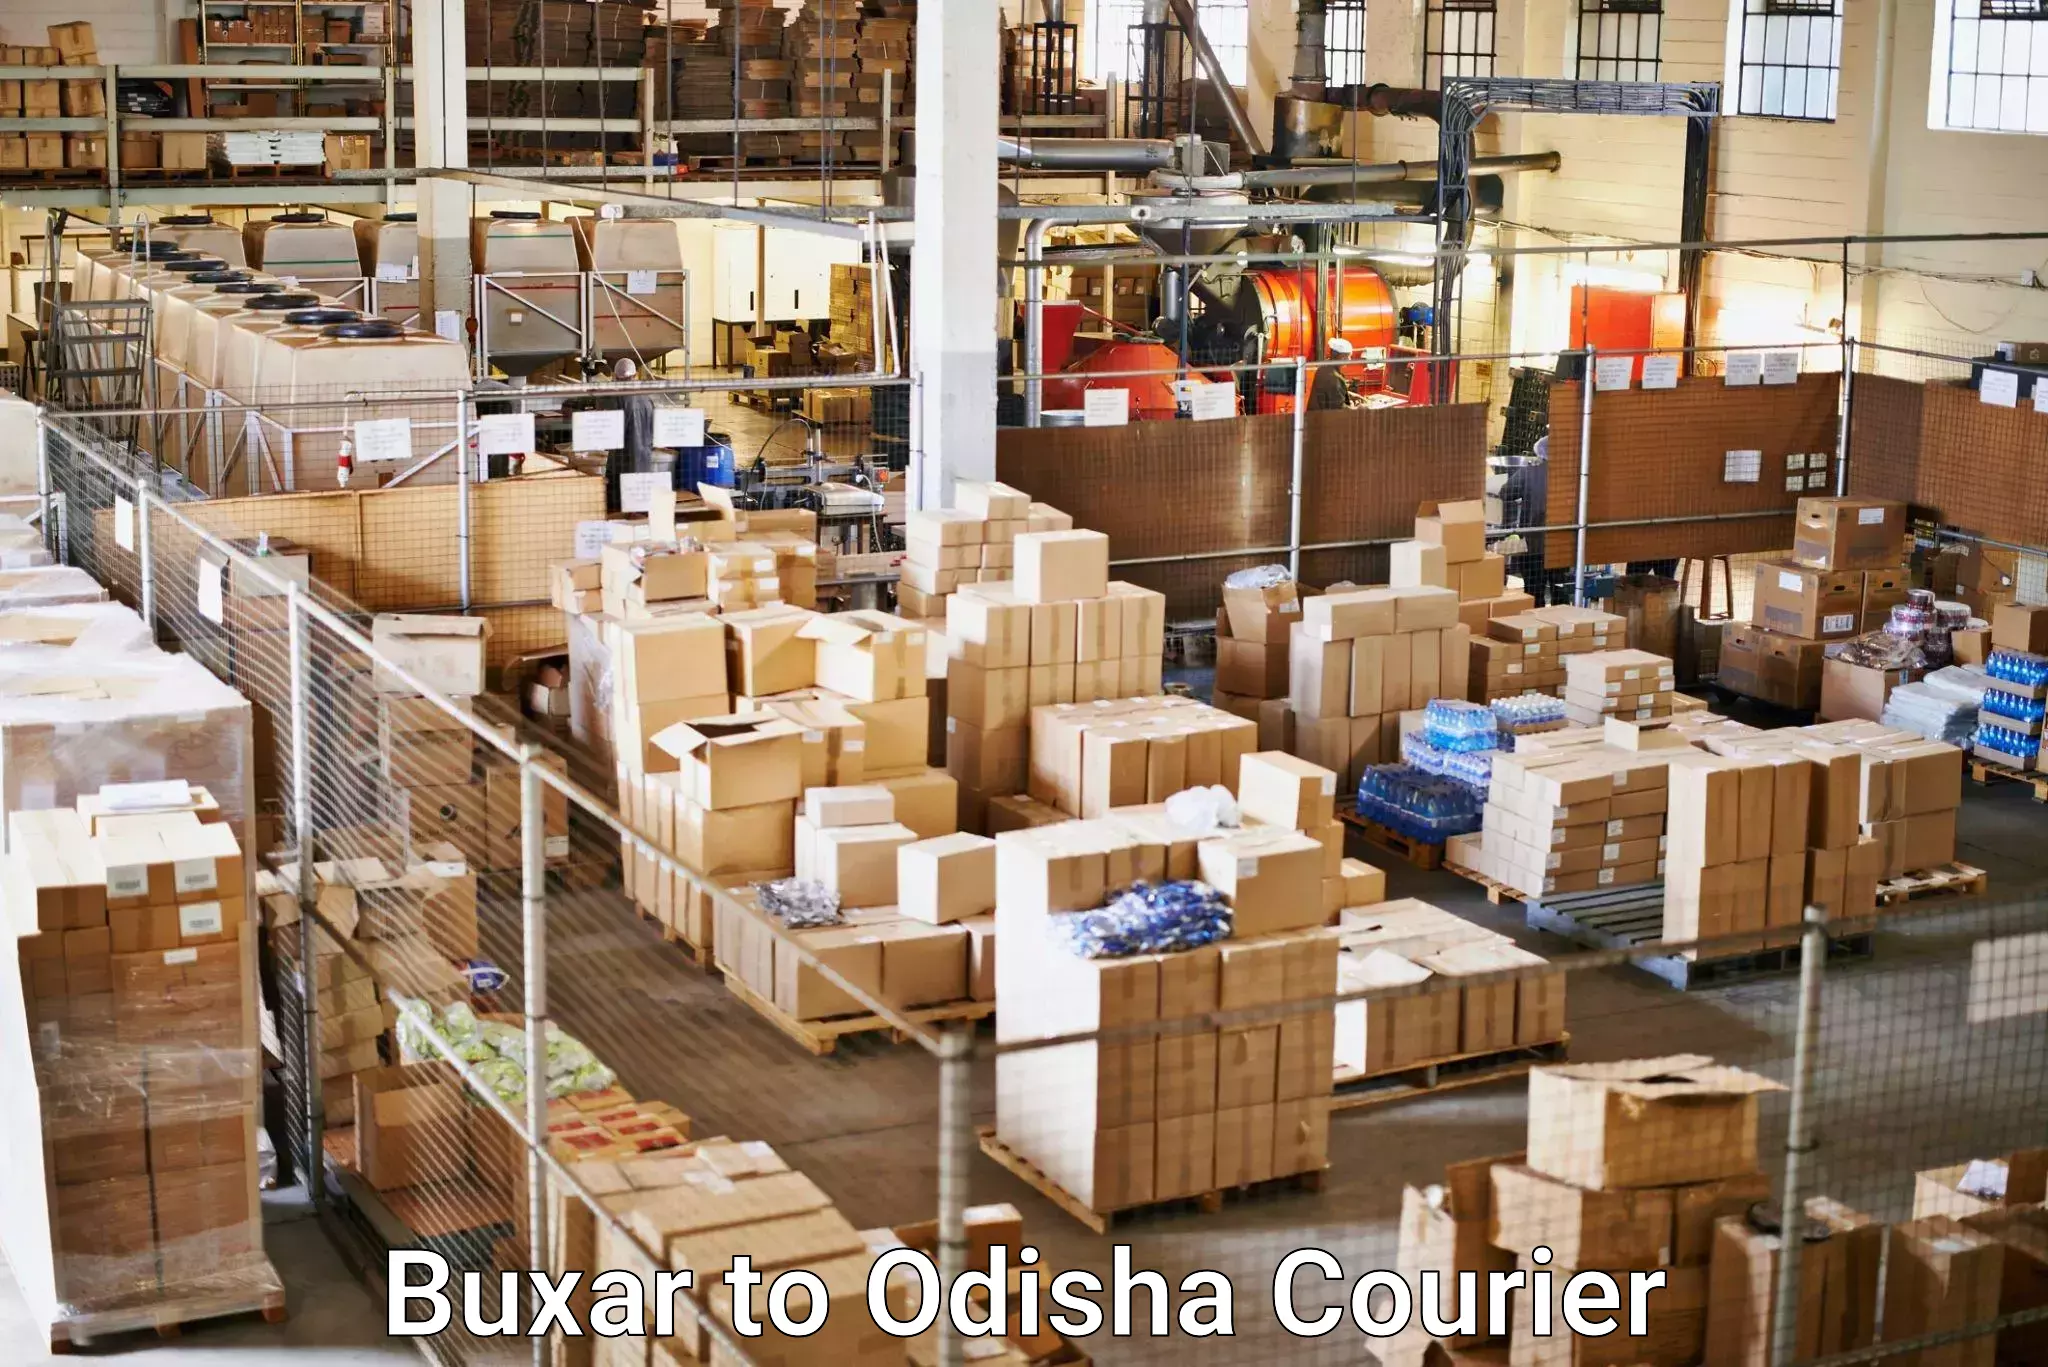 Flexible delivery schedules Buxar to Boudh